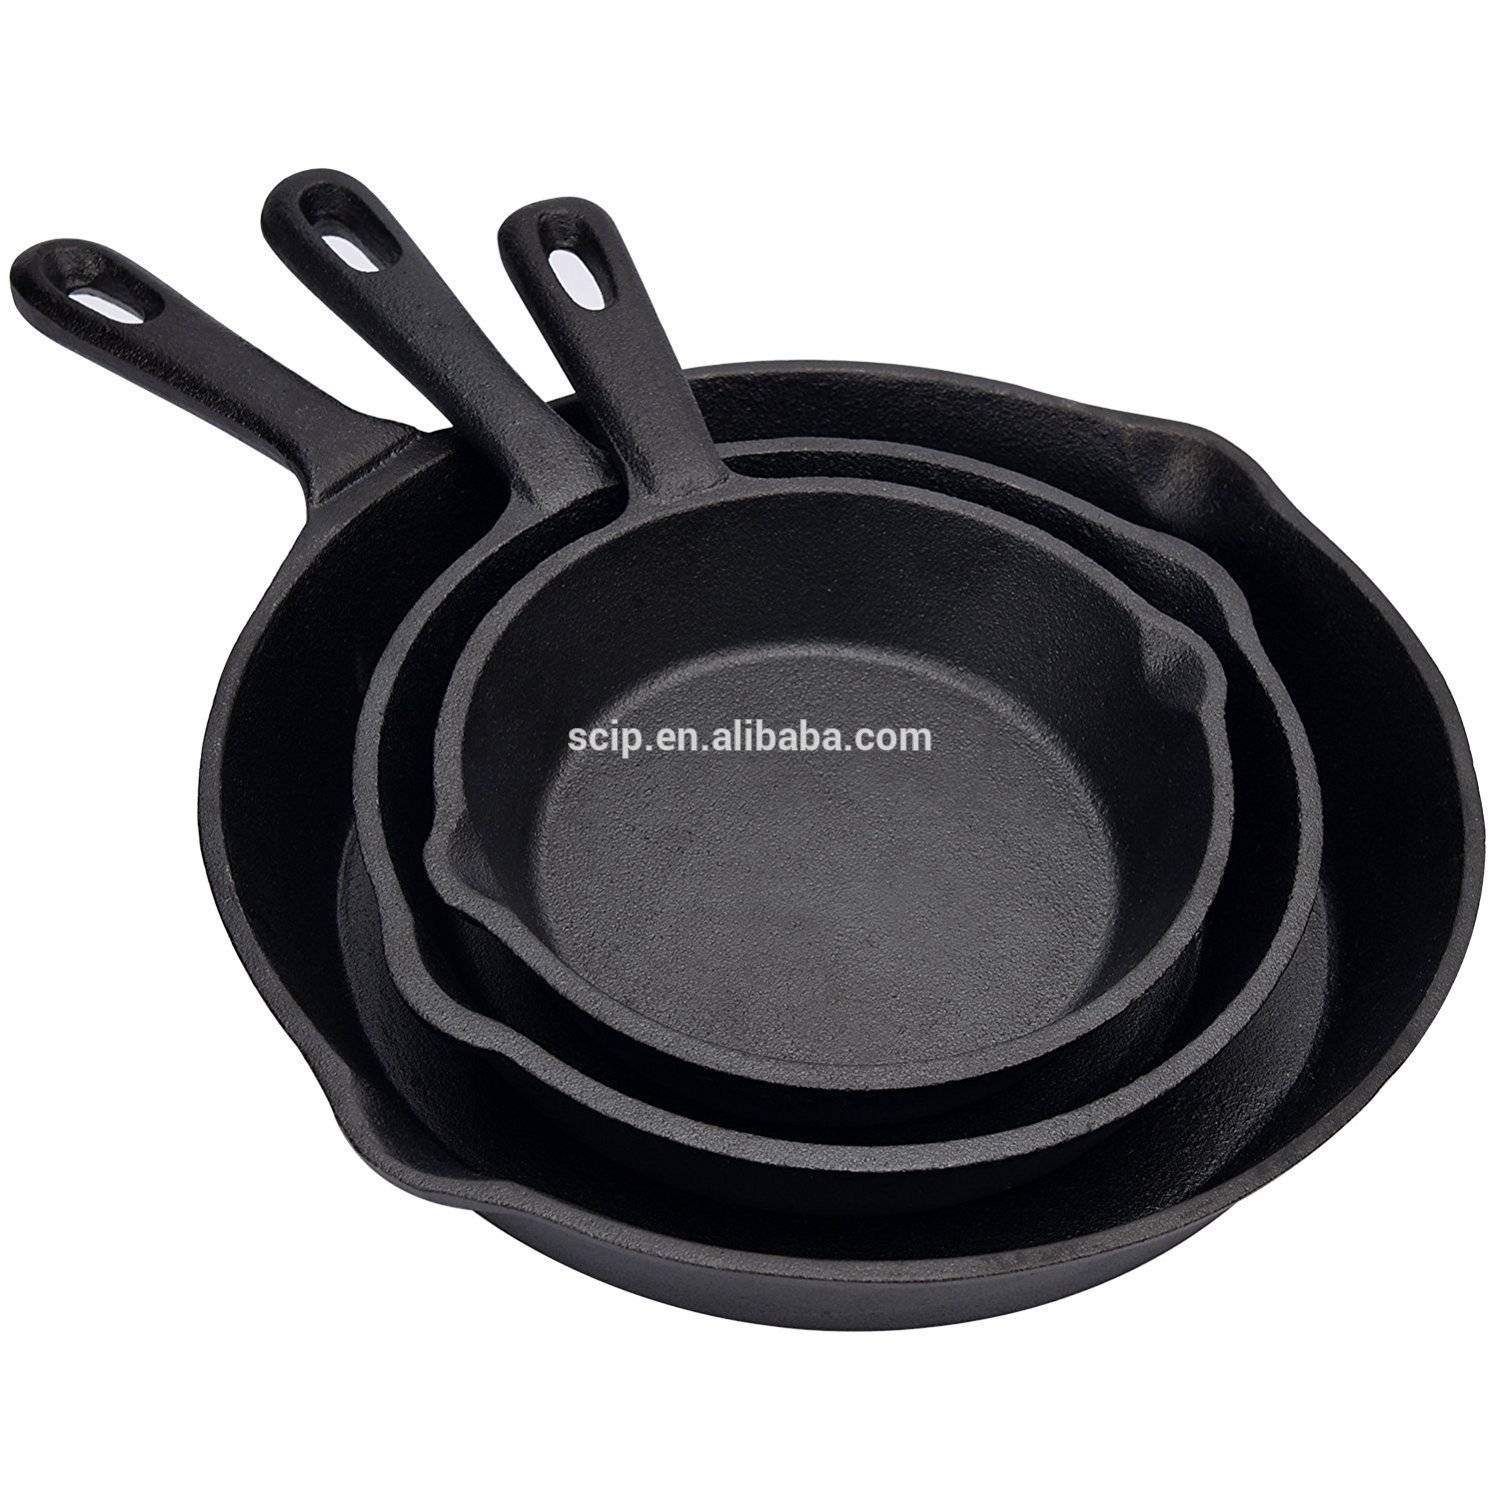 Chinese large cast iron skillet, Pre-Seasoned ,10.5-inch